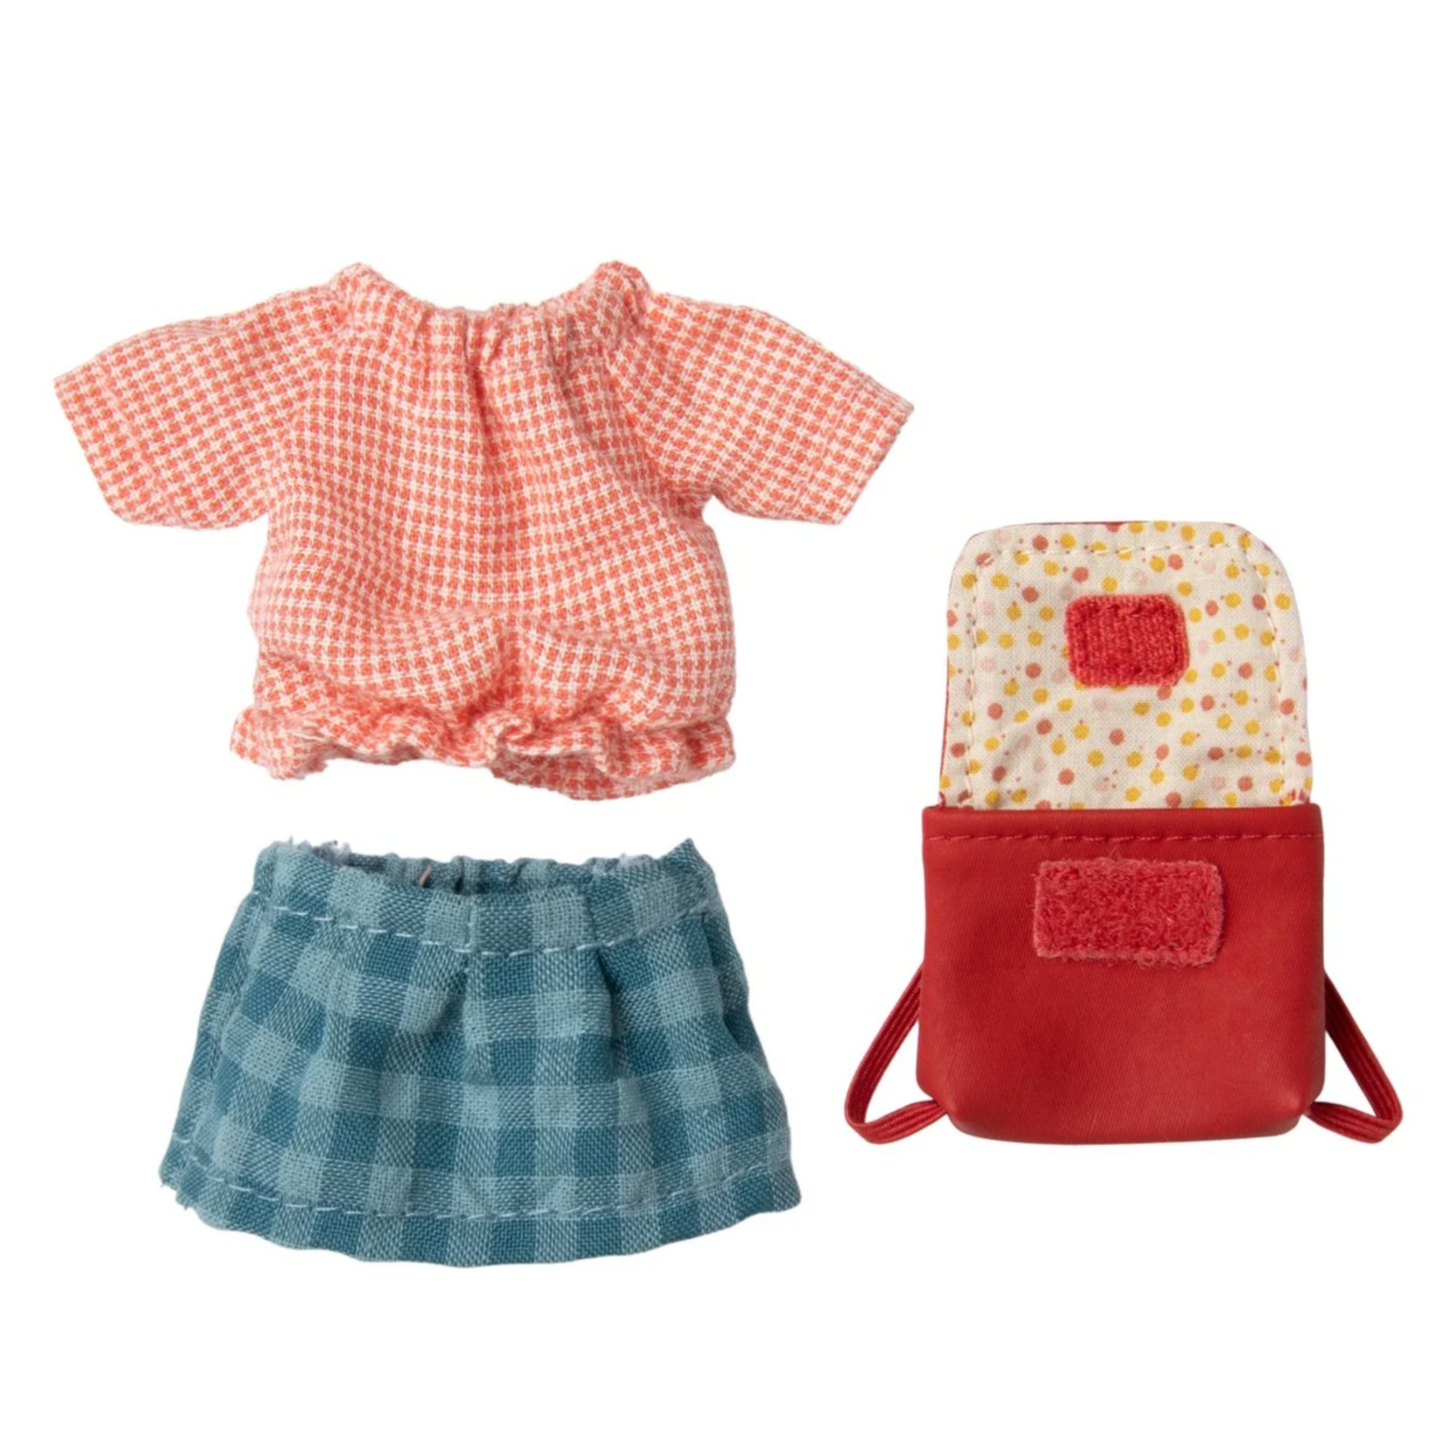 Maileg Clothes and Red Bag for Big Sister Mouse (8220895772959)